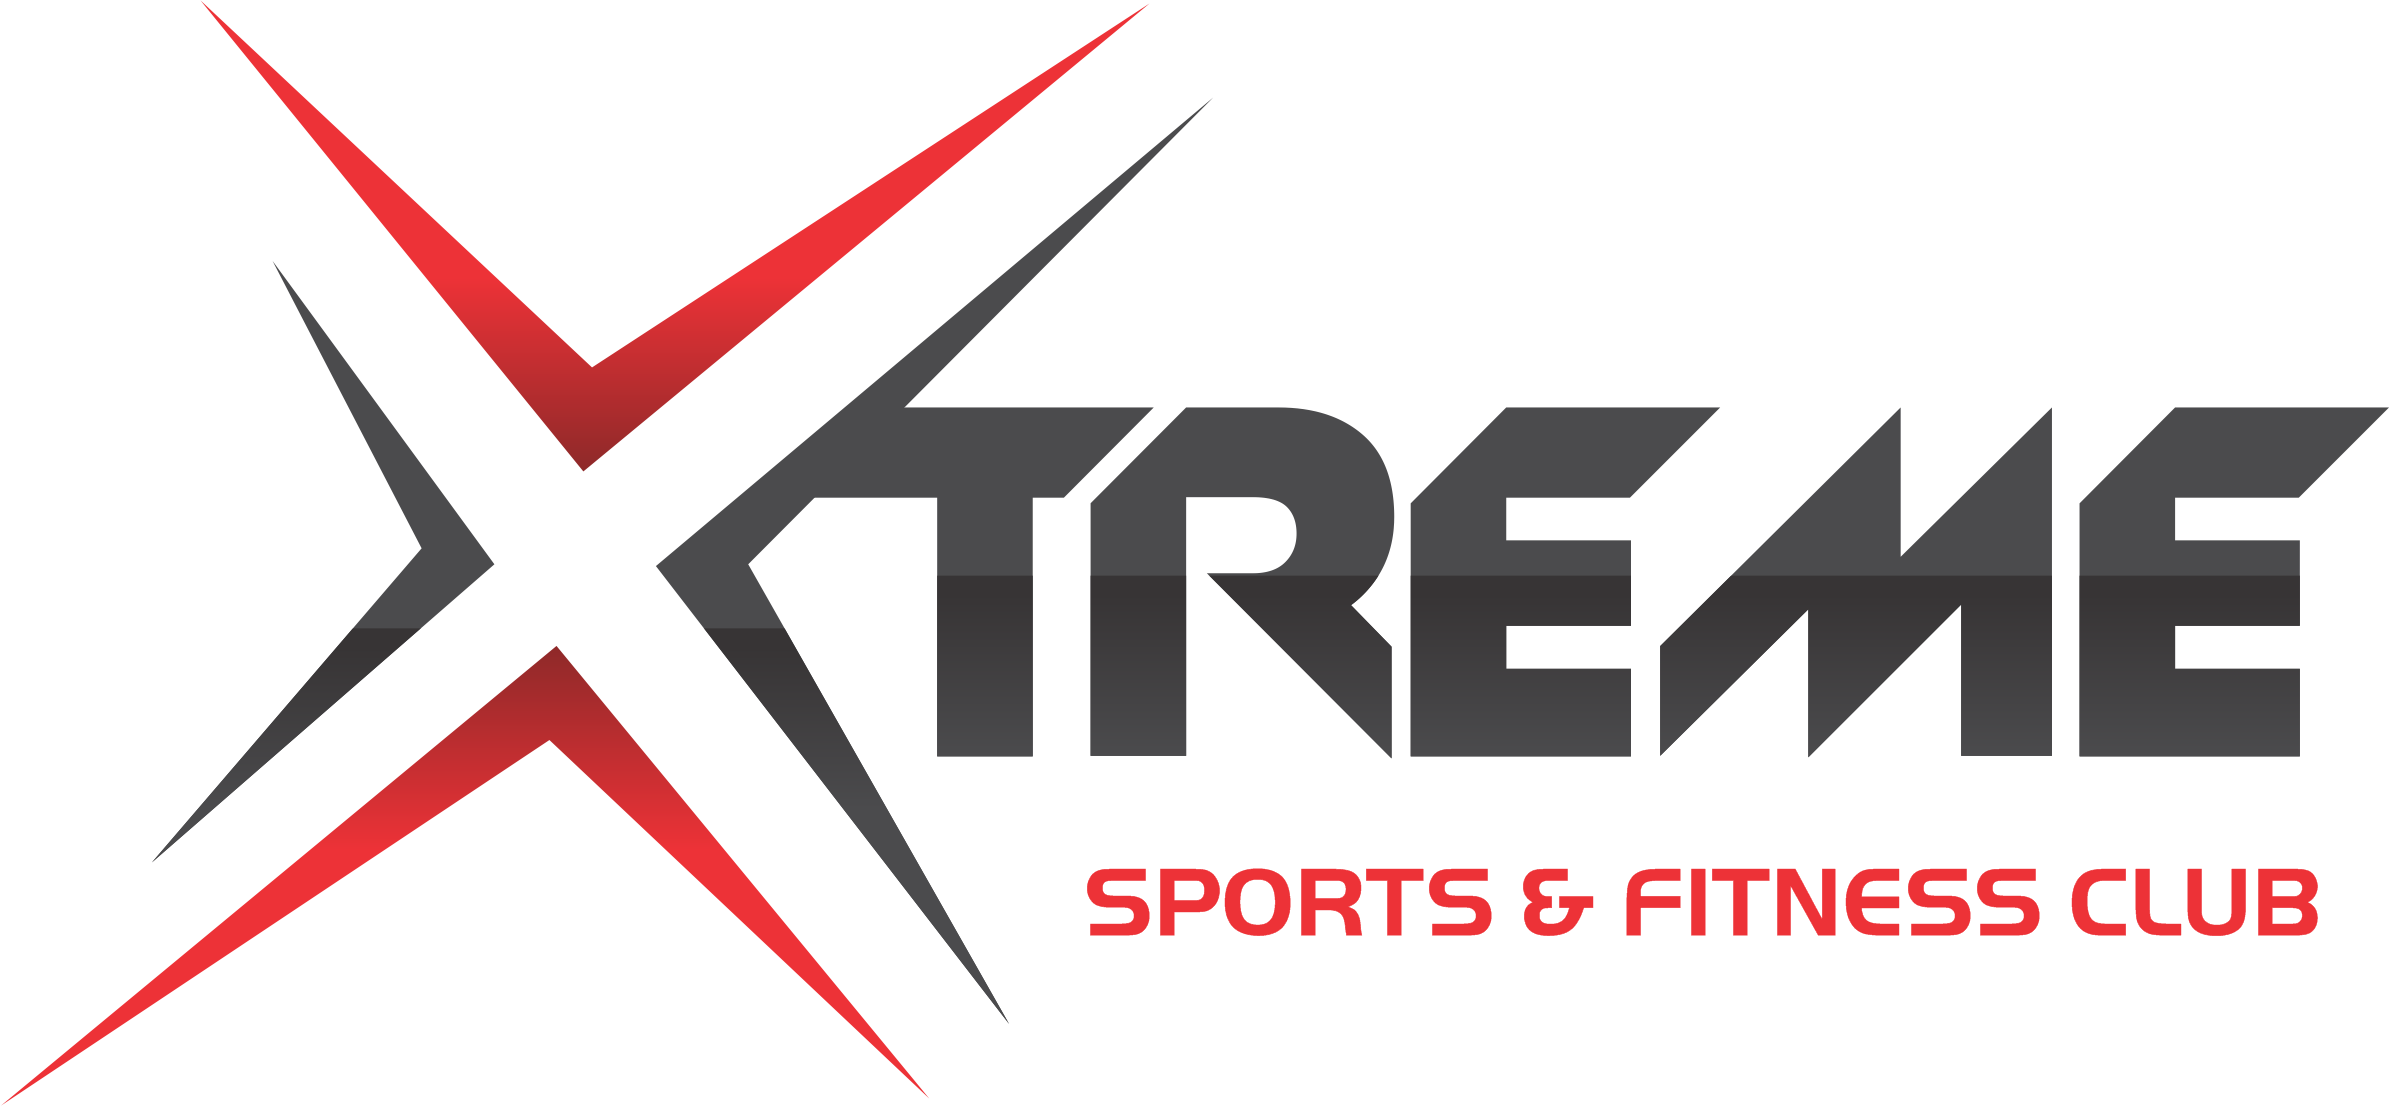 Xtreme Sports and Fitness Club Logo